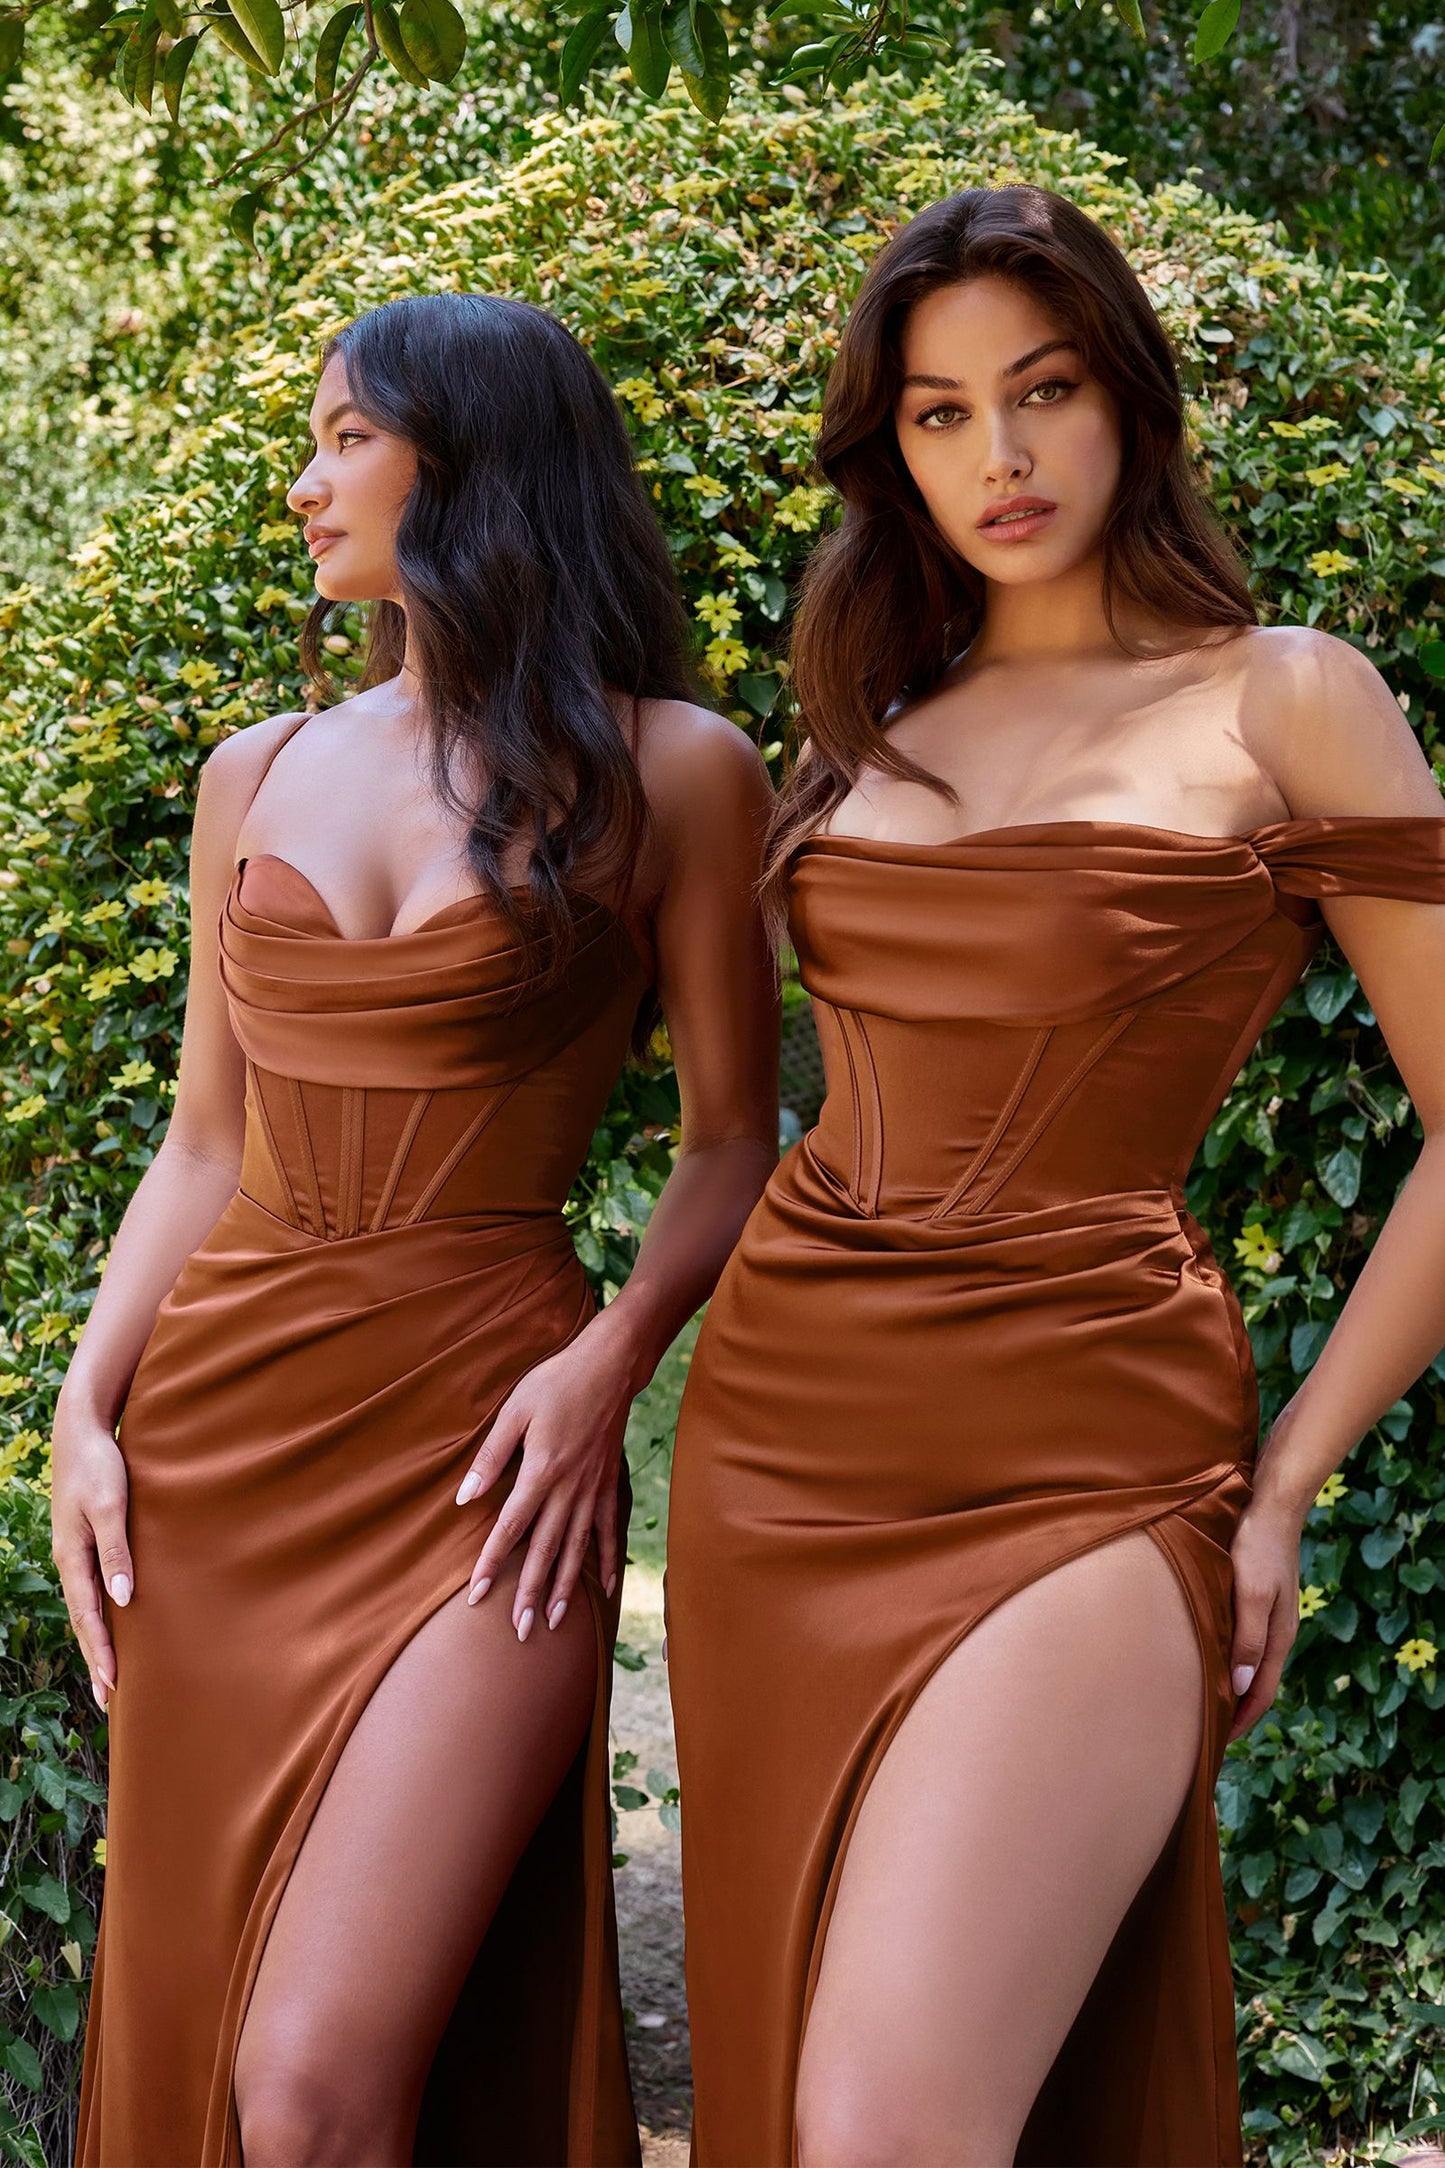 The Ladivine 7483 Corset Prom Dress is a stunning choice for any formal occasion. Its satin fabric and cowl neck add a touch of elegance, while the slit and corset detail provide a modern twist. Perfect for bridesmaids or as a prom dress, this gown will make you feel confident and beautiful.